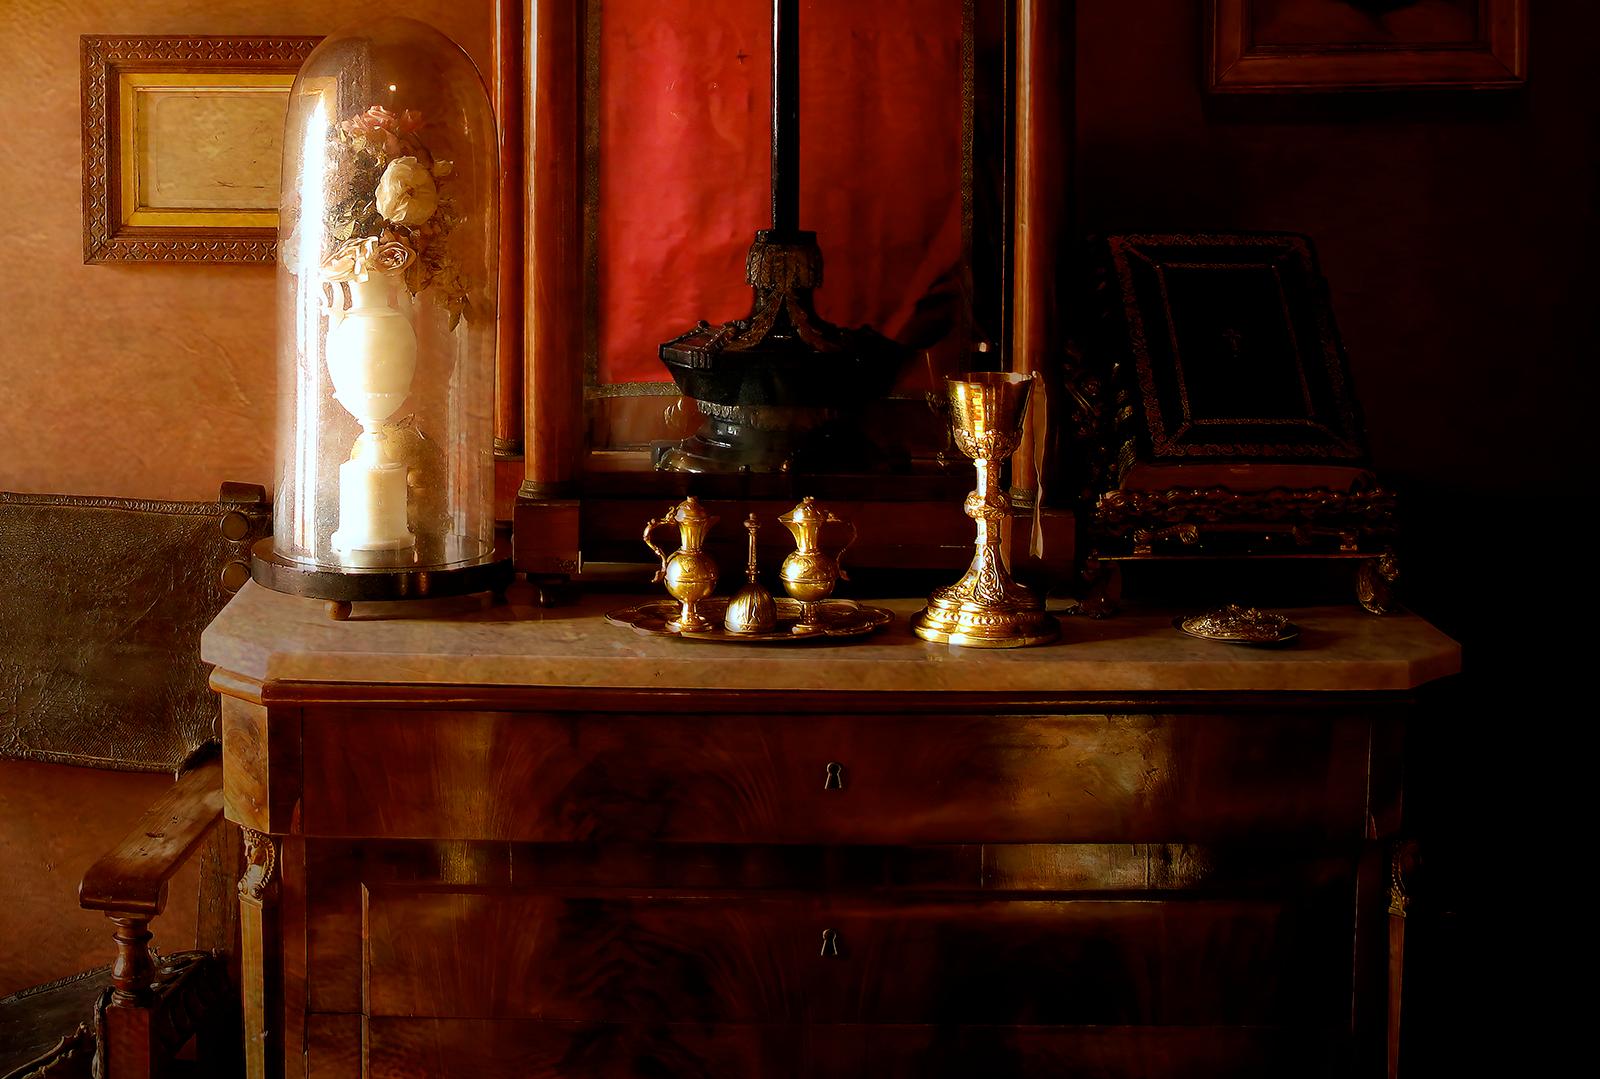 Interior - Signed limited edition still life pigment print, Contemporary, Brown - Photograph by Albert Giralt 